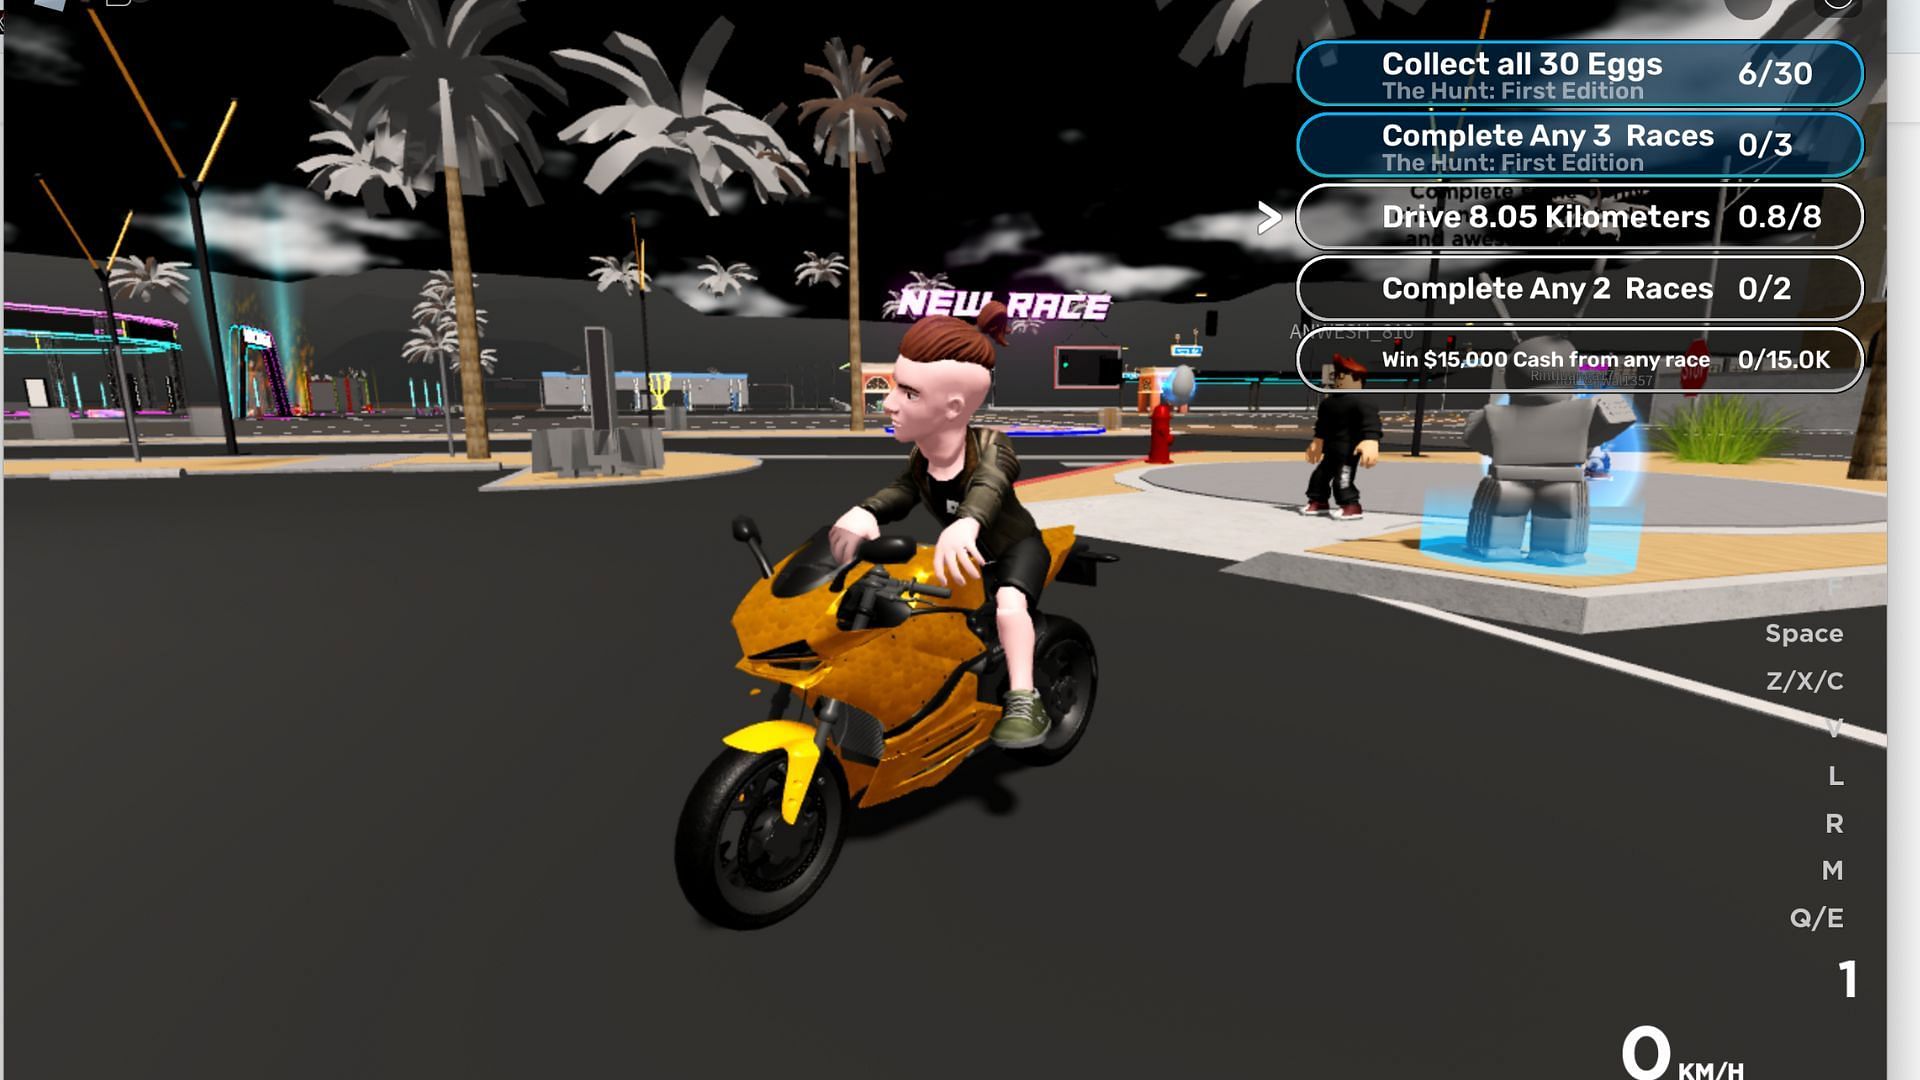 Racing in the game (Image via Roblox)